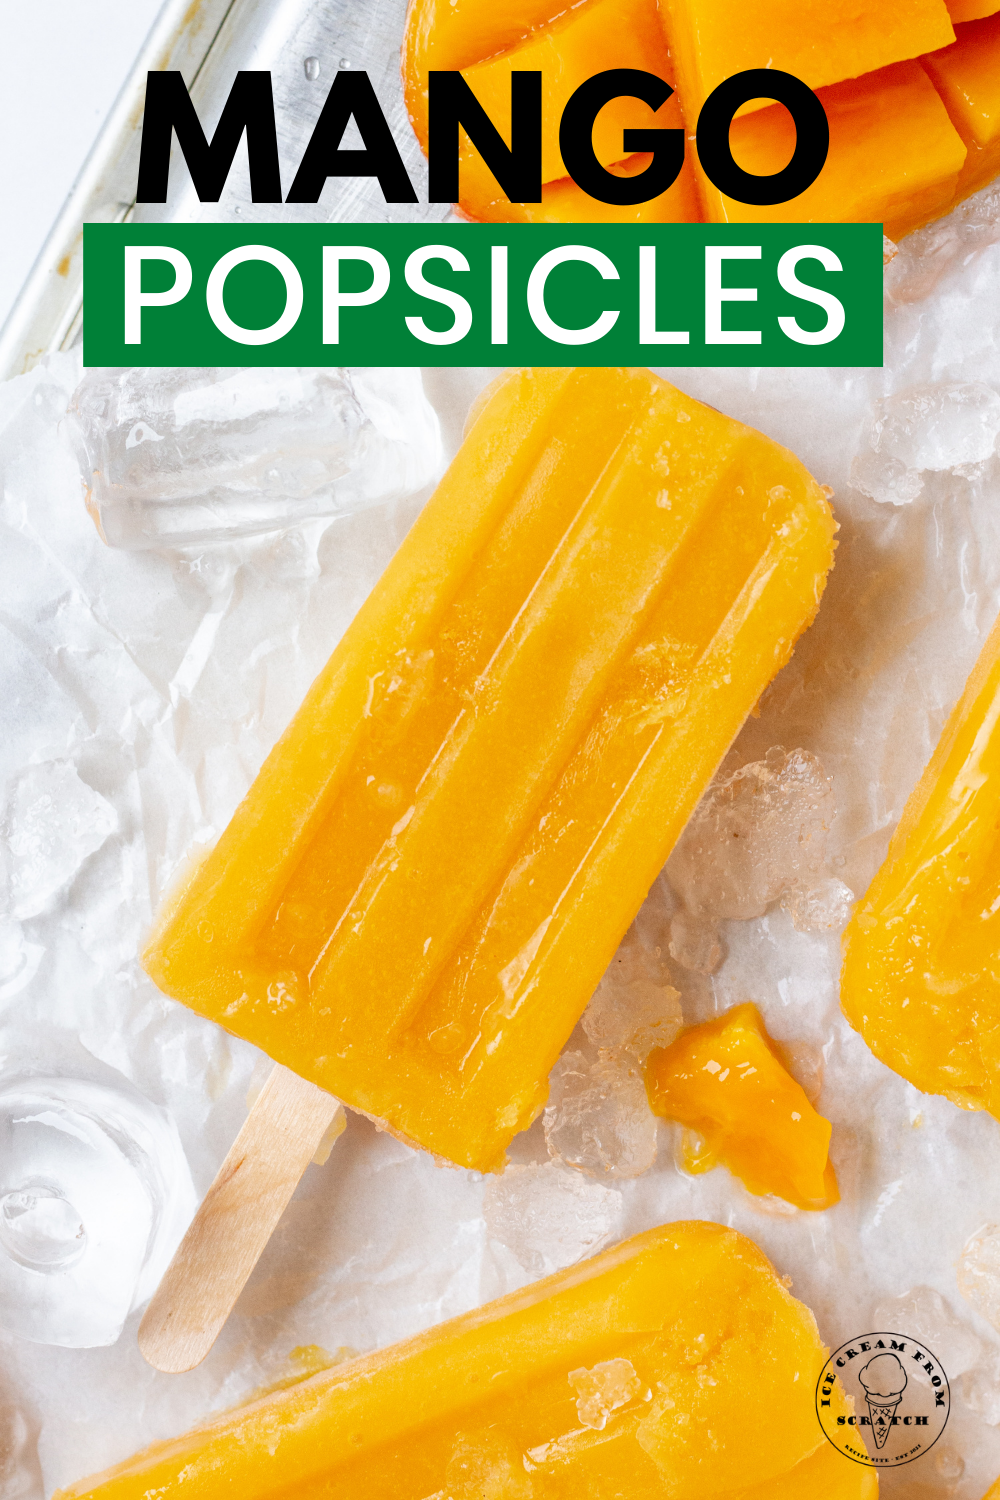 mango popsicles on a tray of ice. Small chunks of mango are next to them. Text overlay at top of image says Mango Popsicles